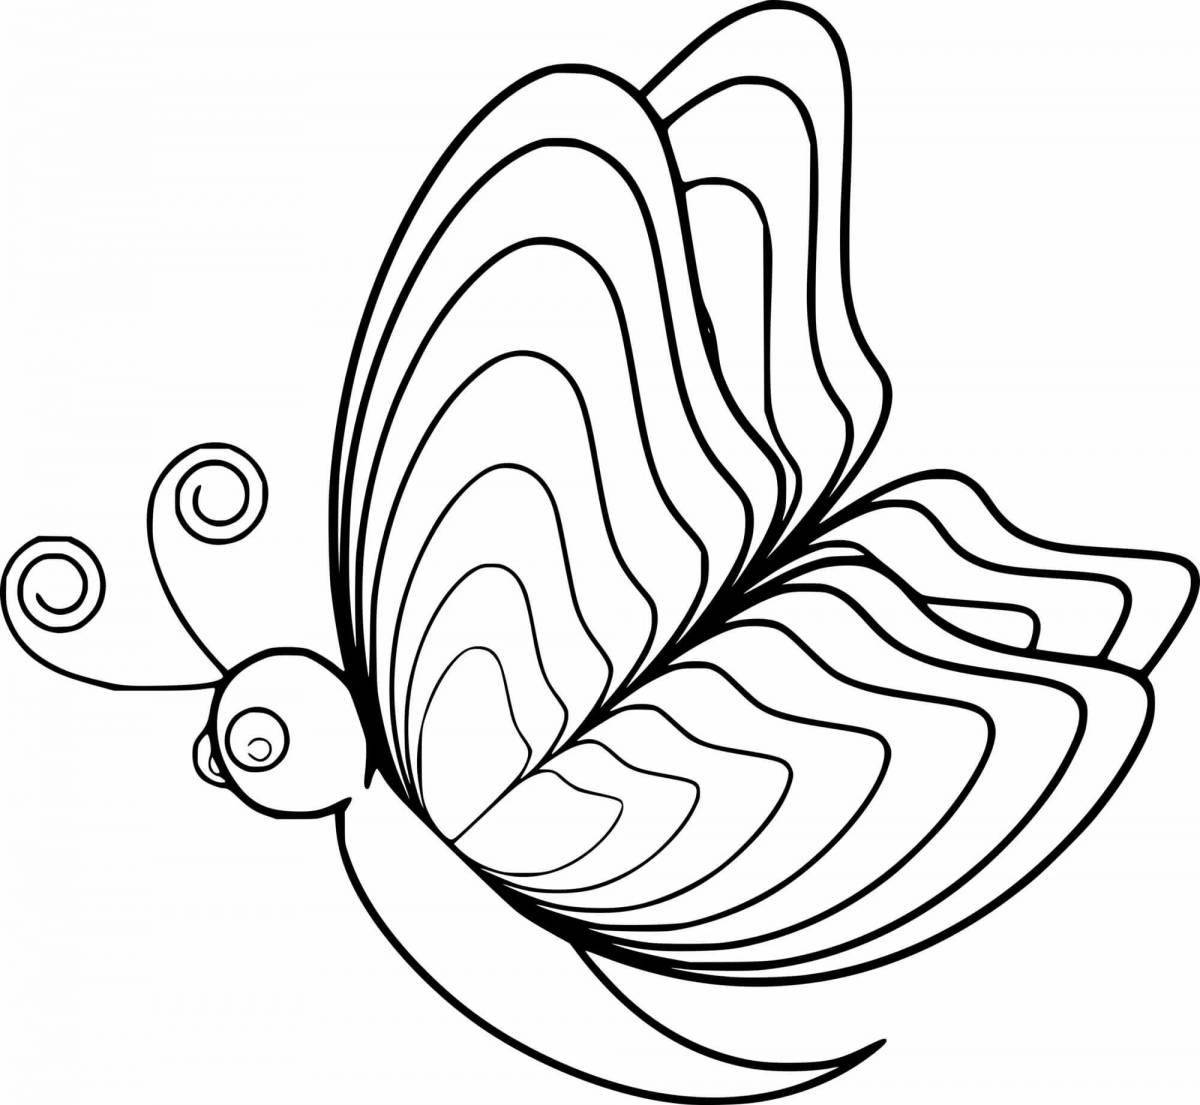 A fascinating coloring book of butterfly wings